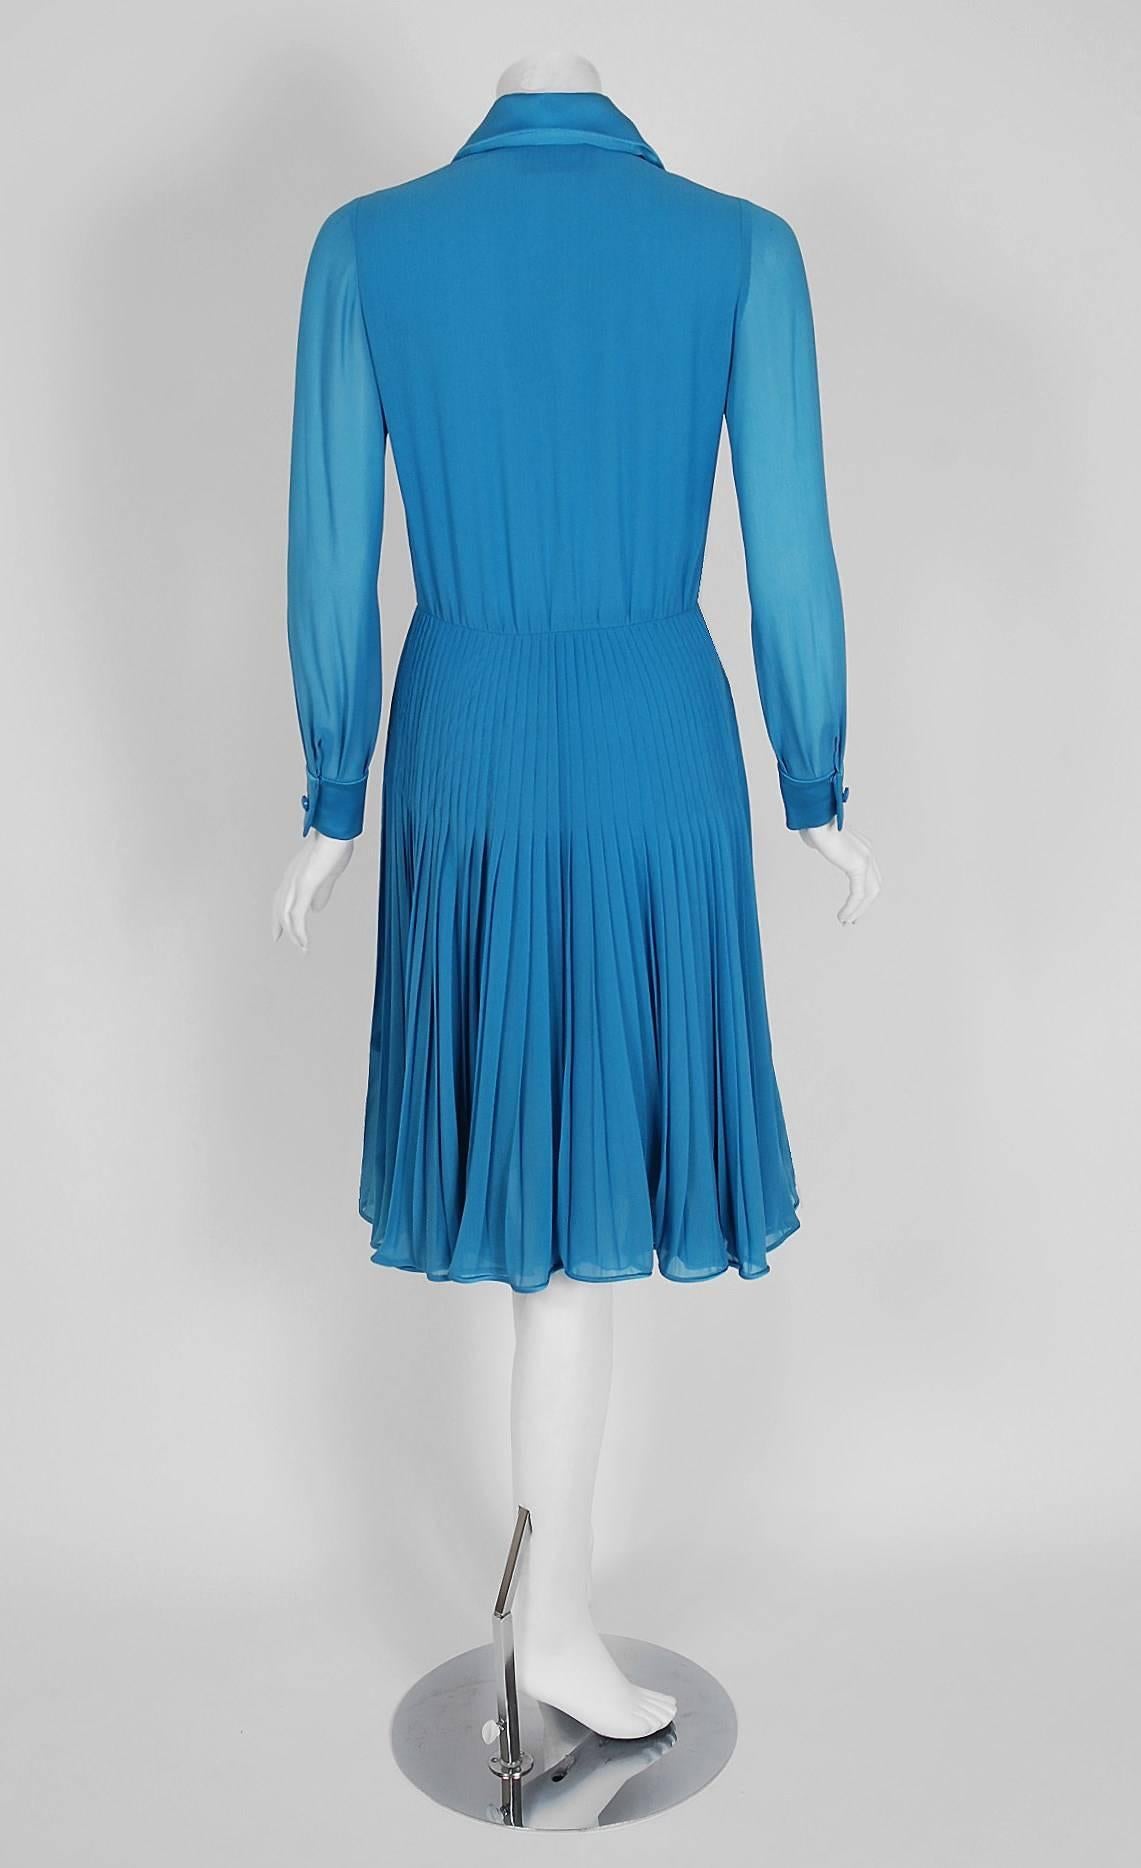 Vintage 1974 Valentino Couture Turquoise-Blue Chiffon Pleated Swing Shirtdress 2